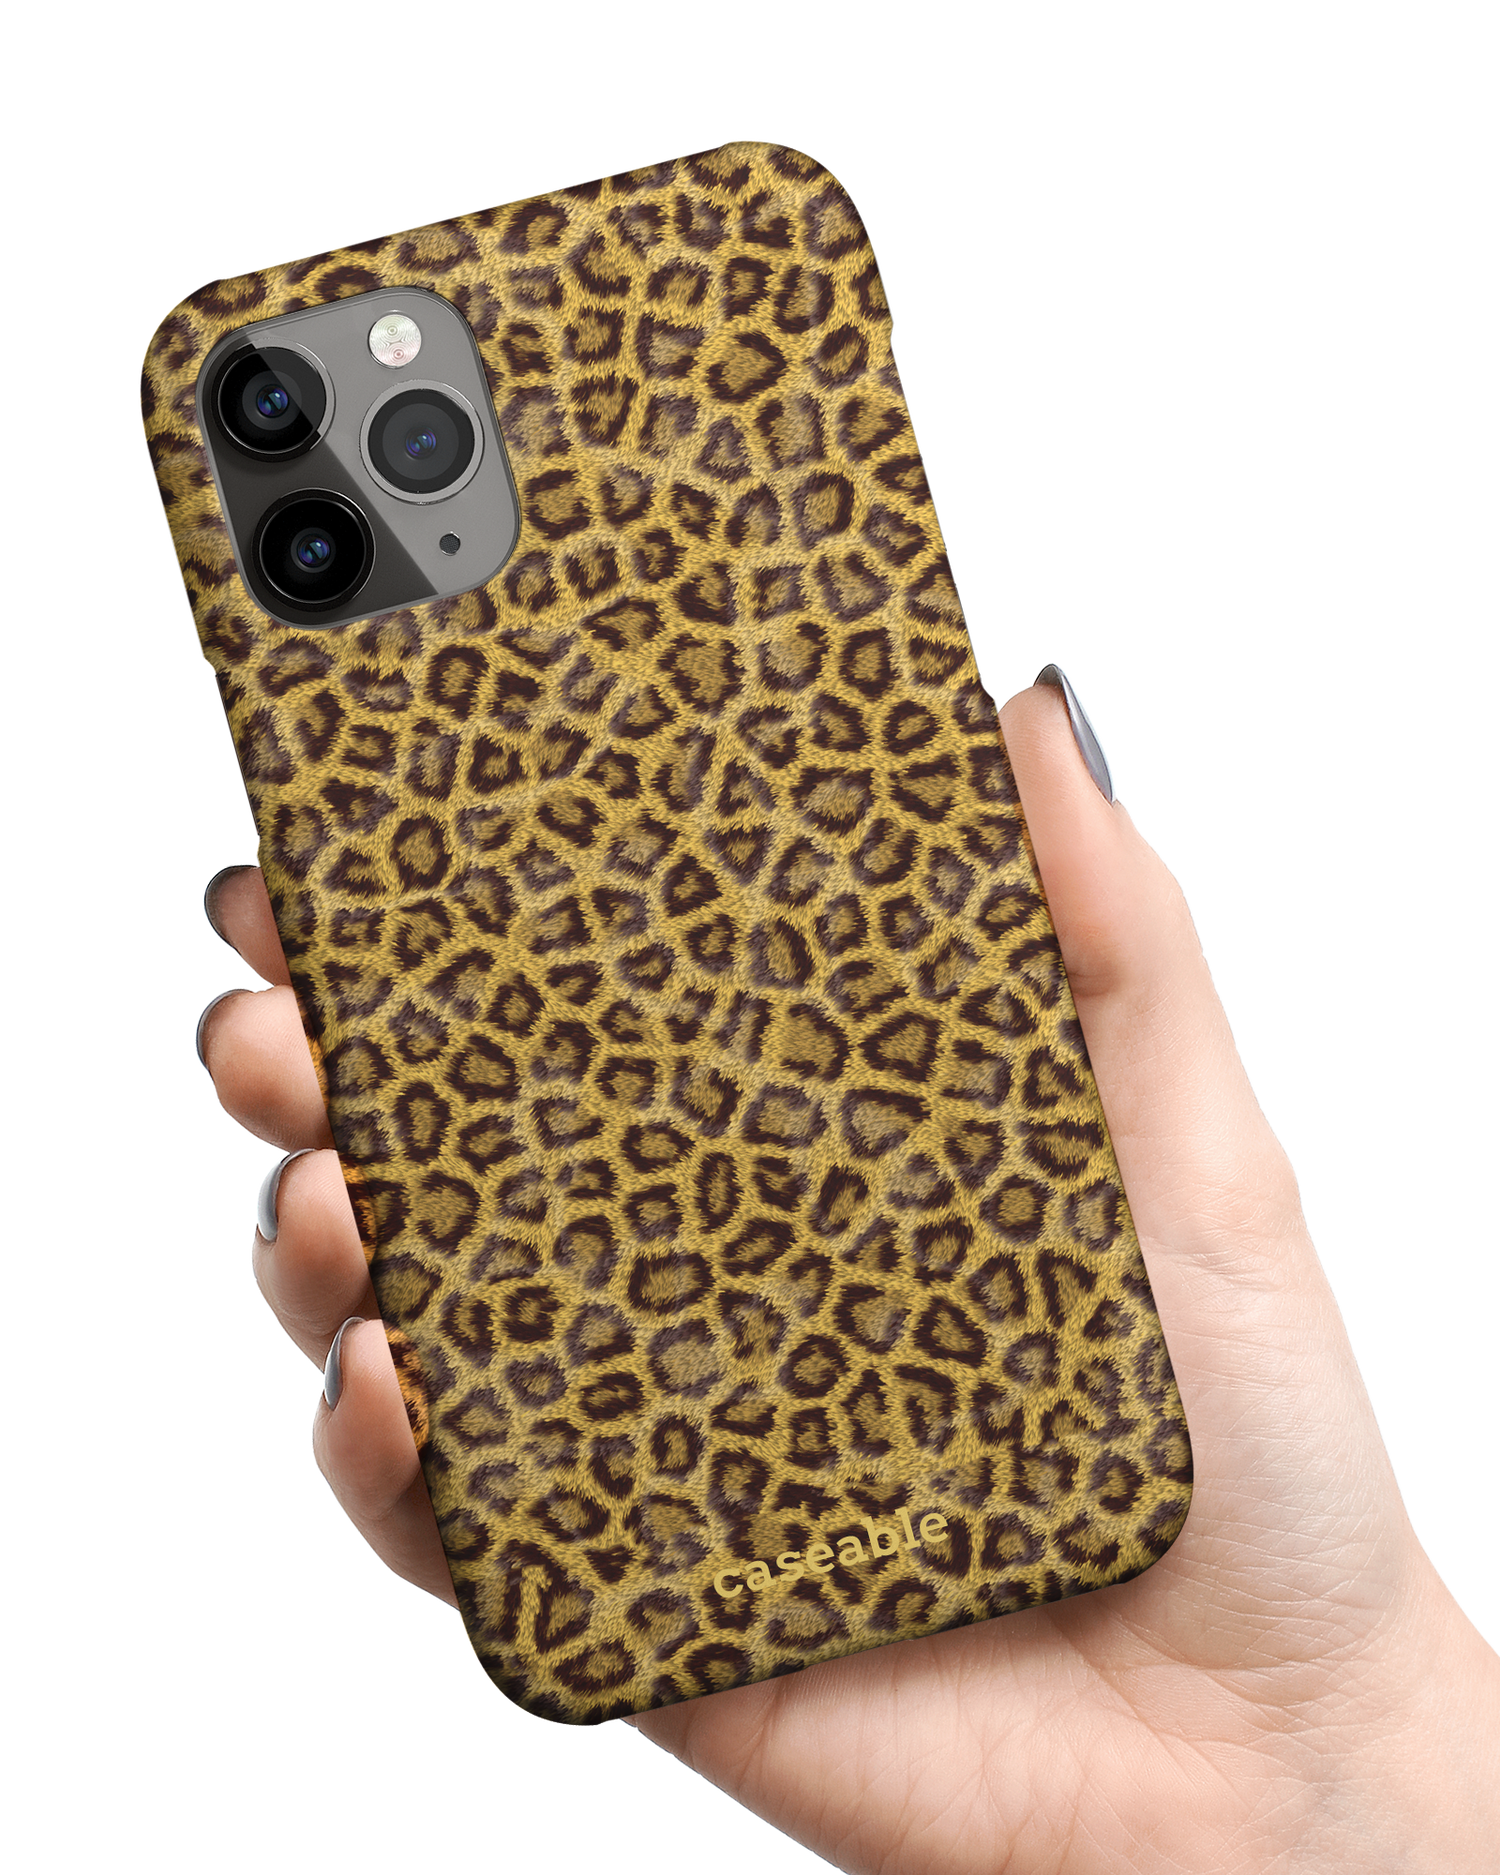 Leopard Skin Hard Shell Phone Case Apple iPhone 11 Pro Max held in hand